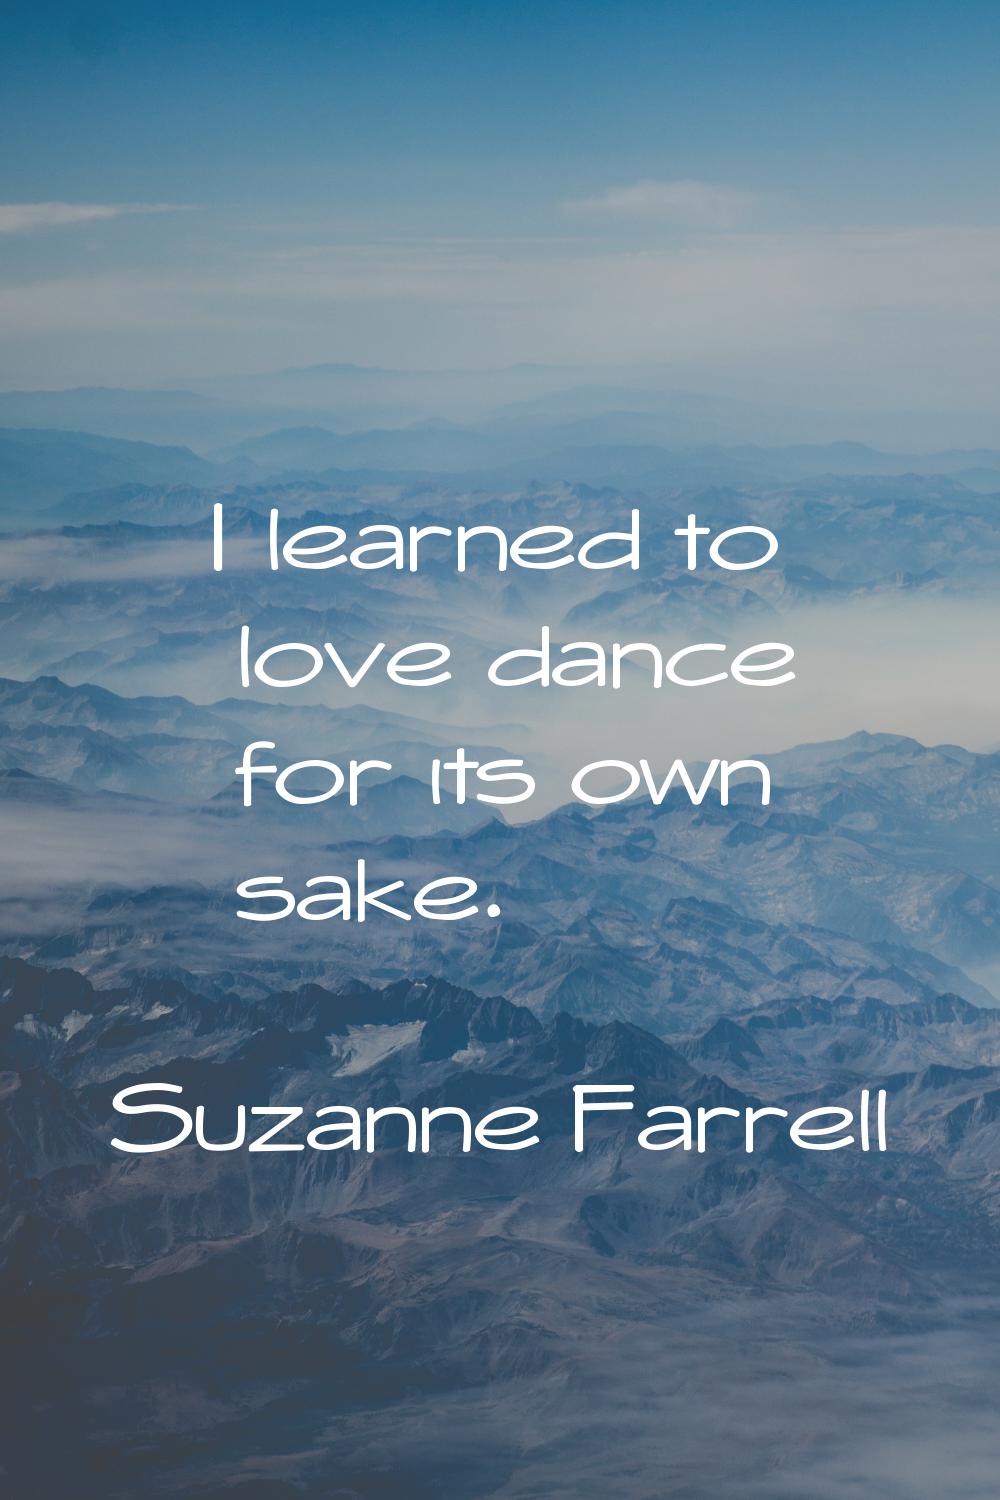 I learned to love dance for its own sake.